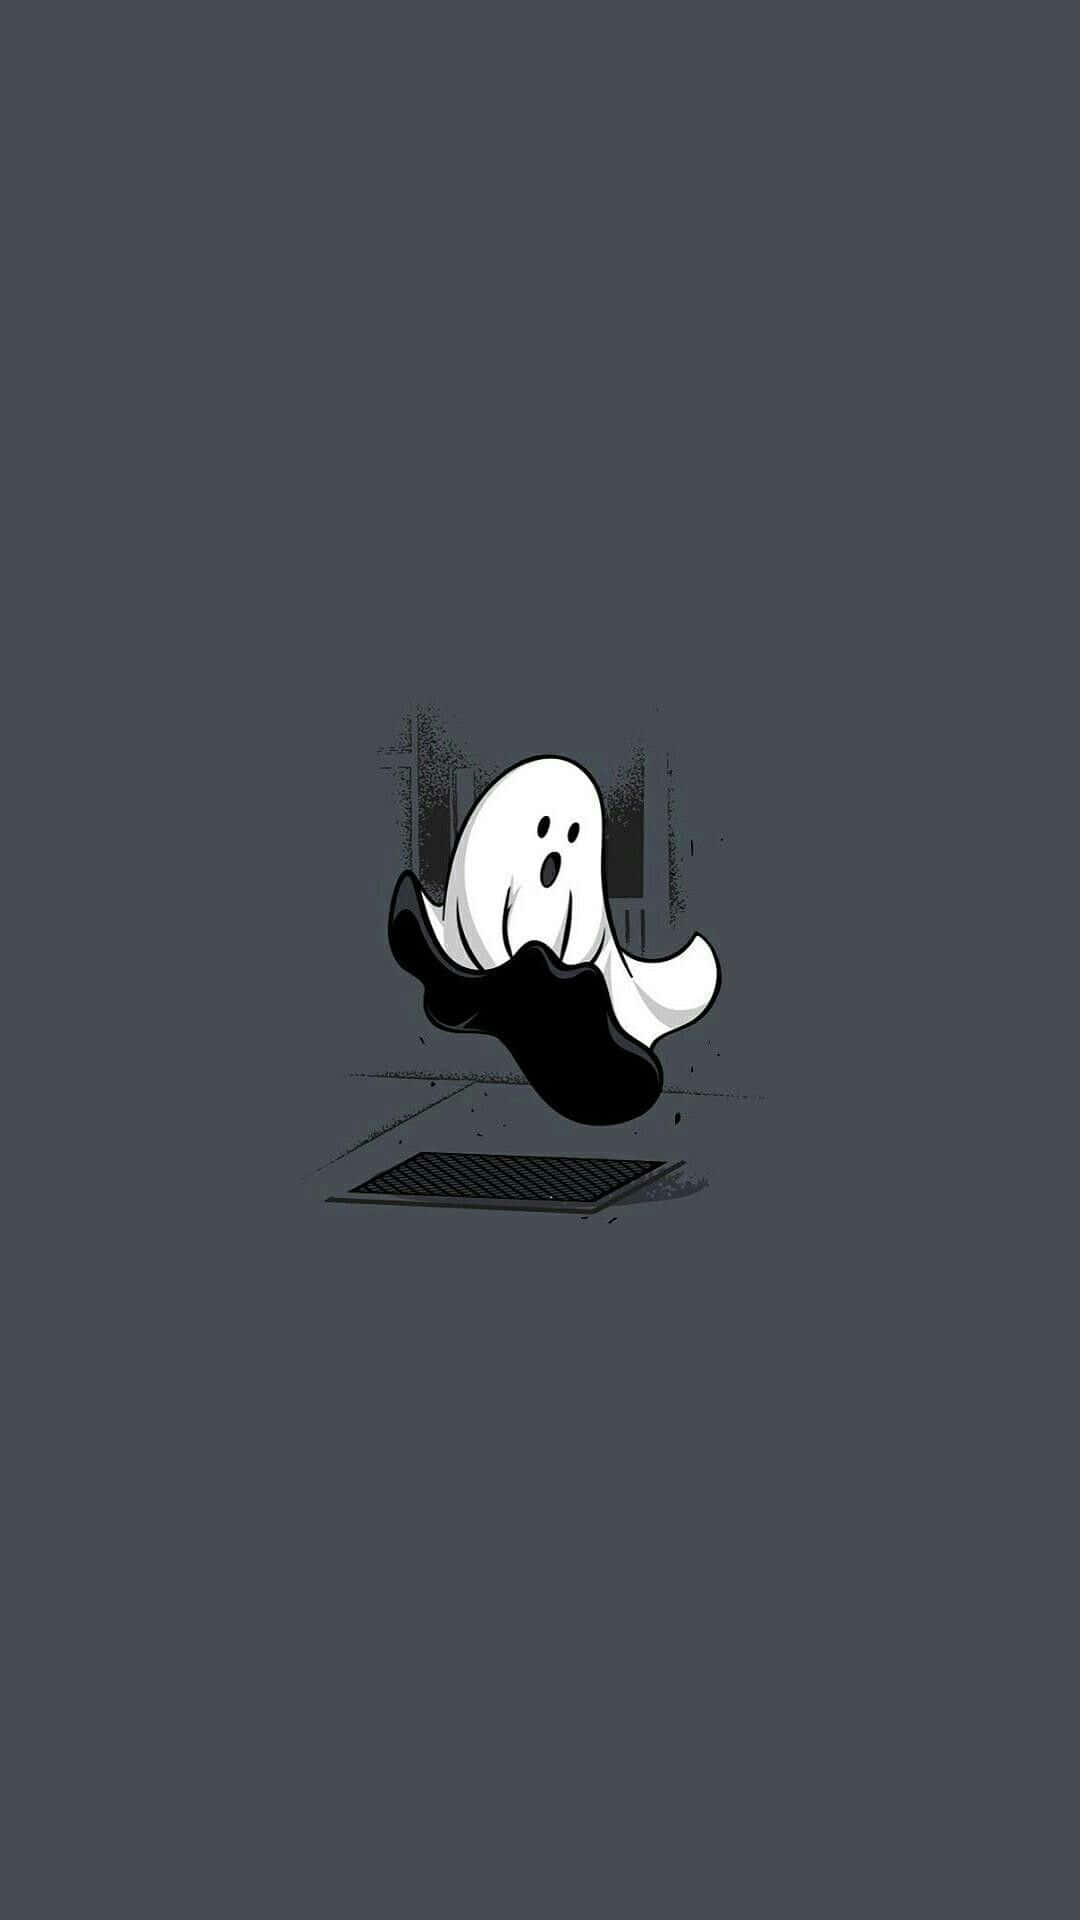 Stay Cute and Spooky! Wallpaper